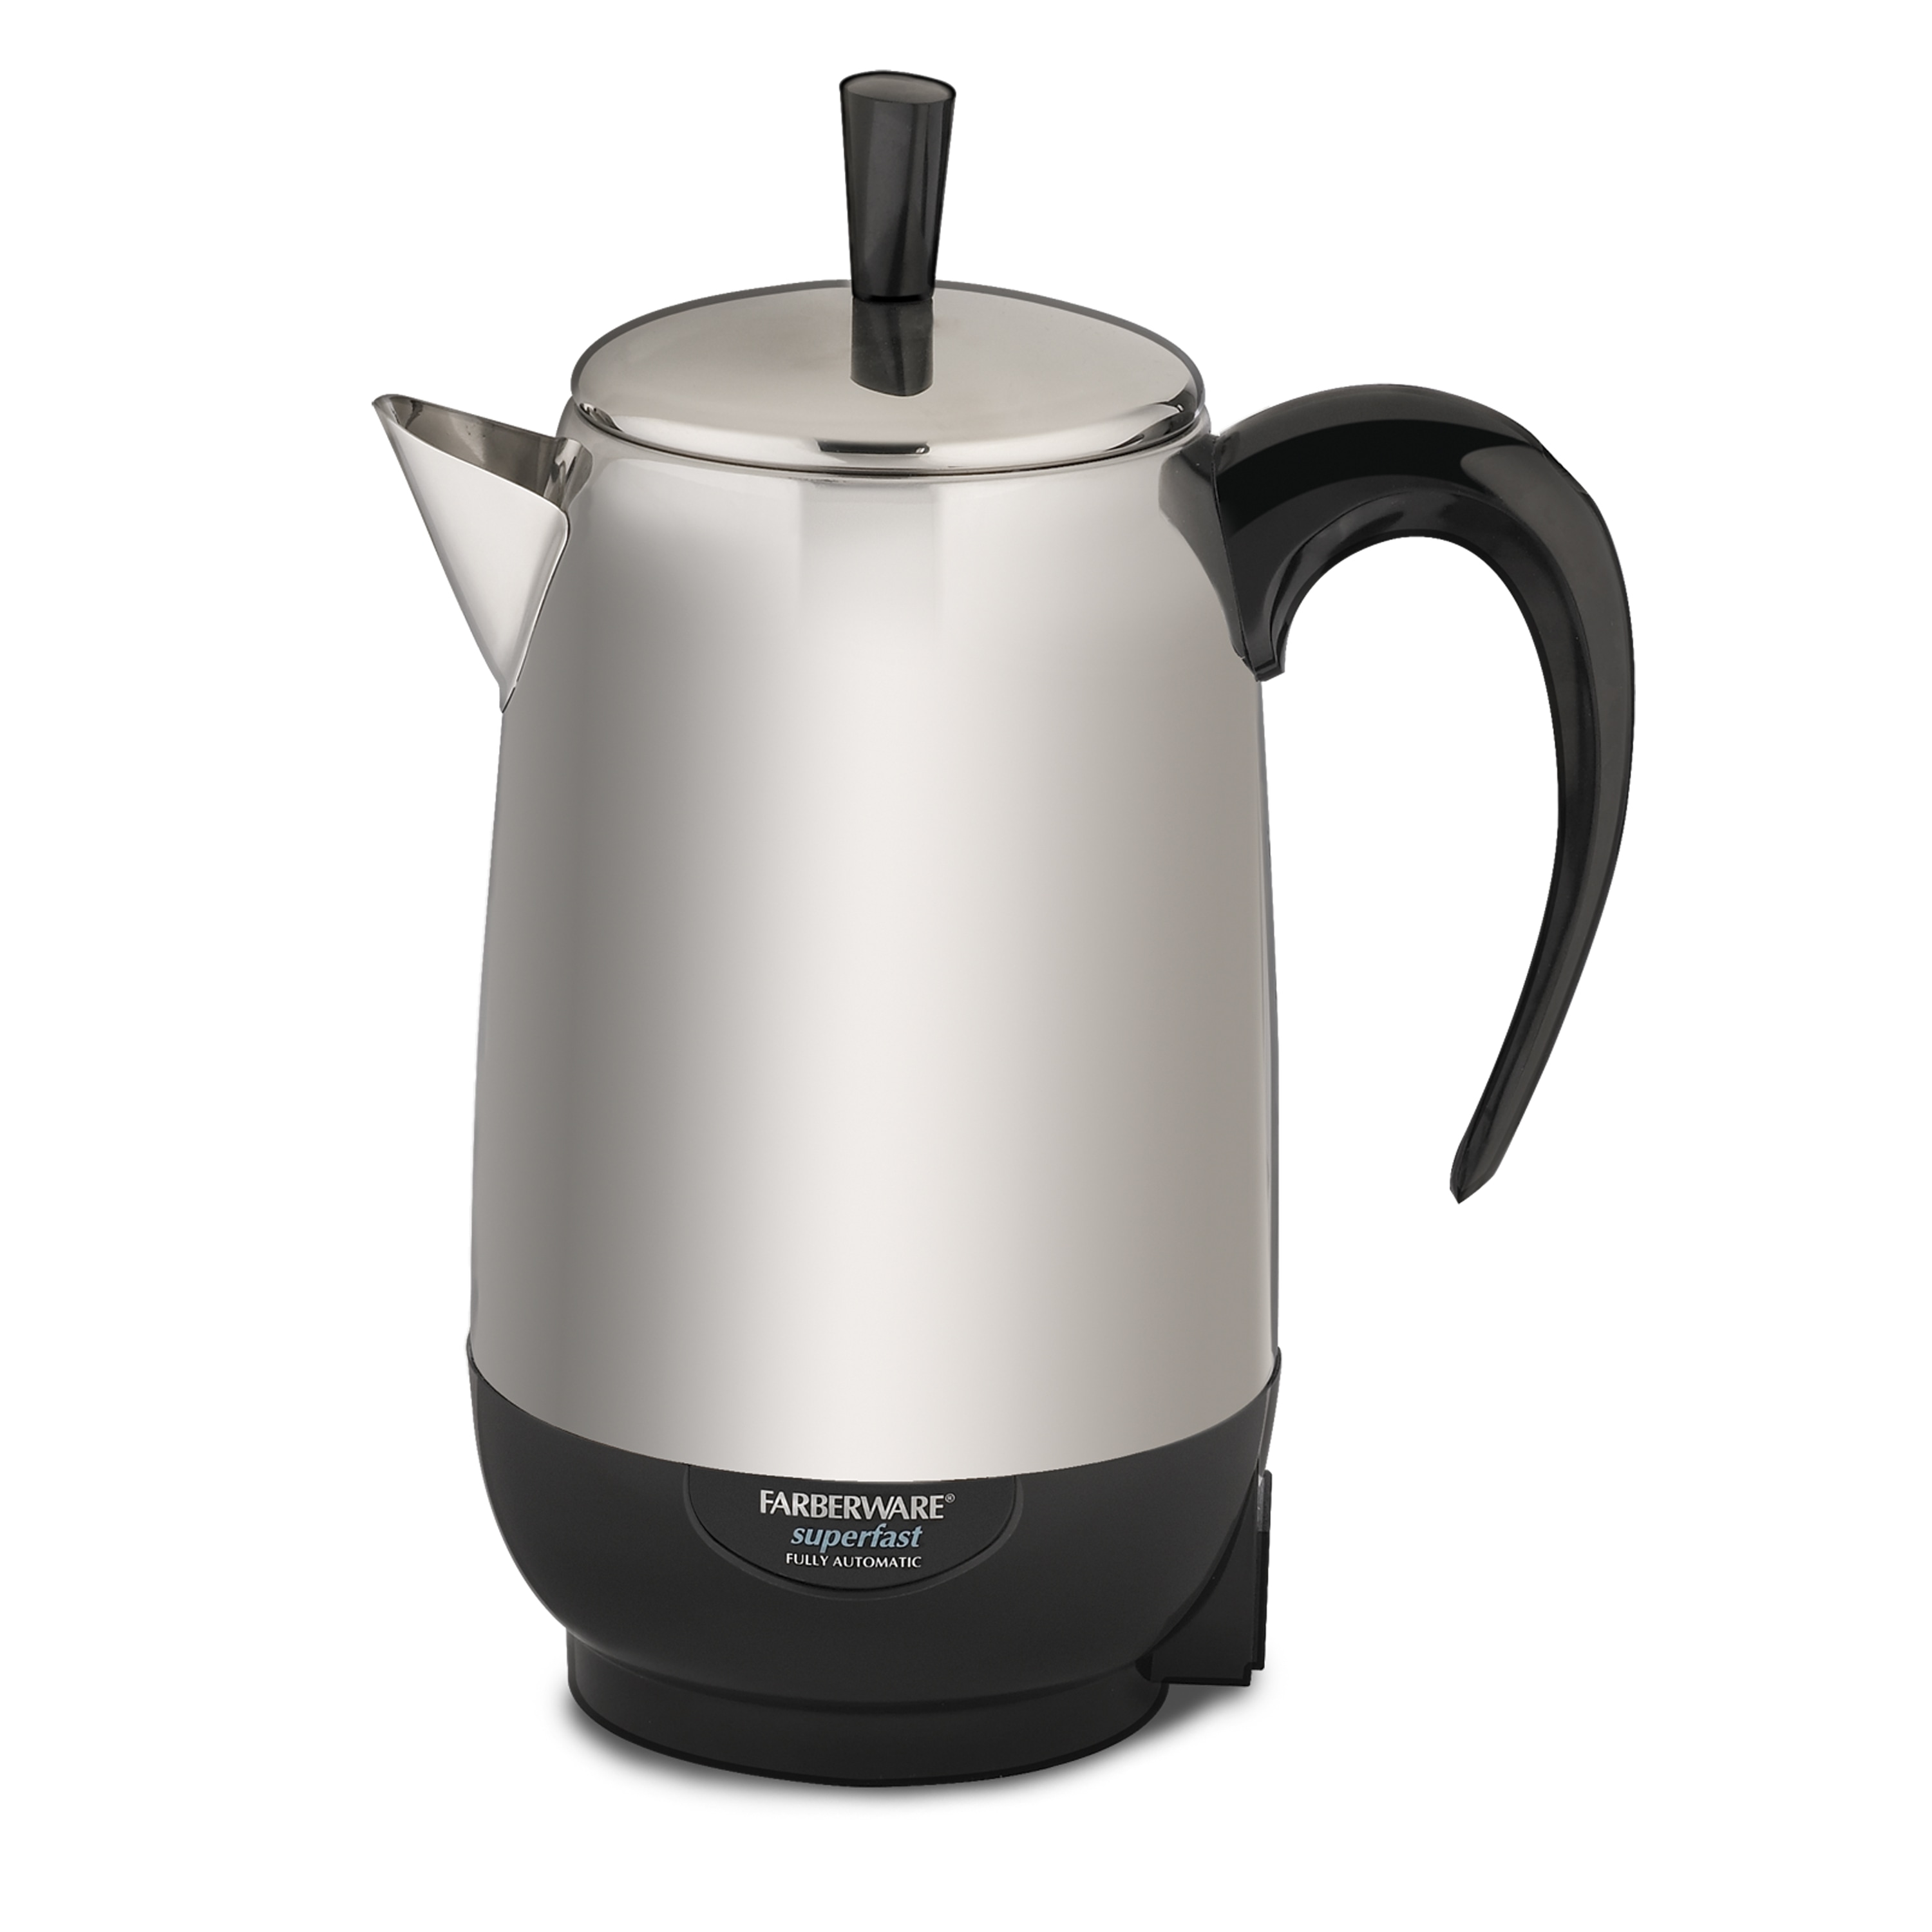 Stainless Steel 8-cup Percolator